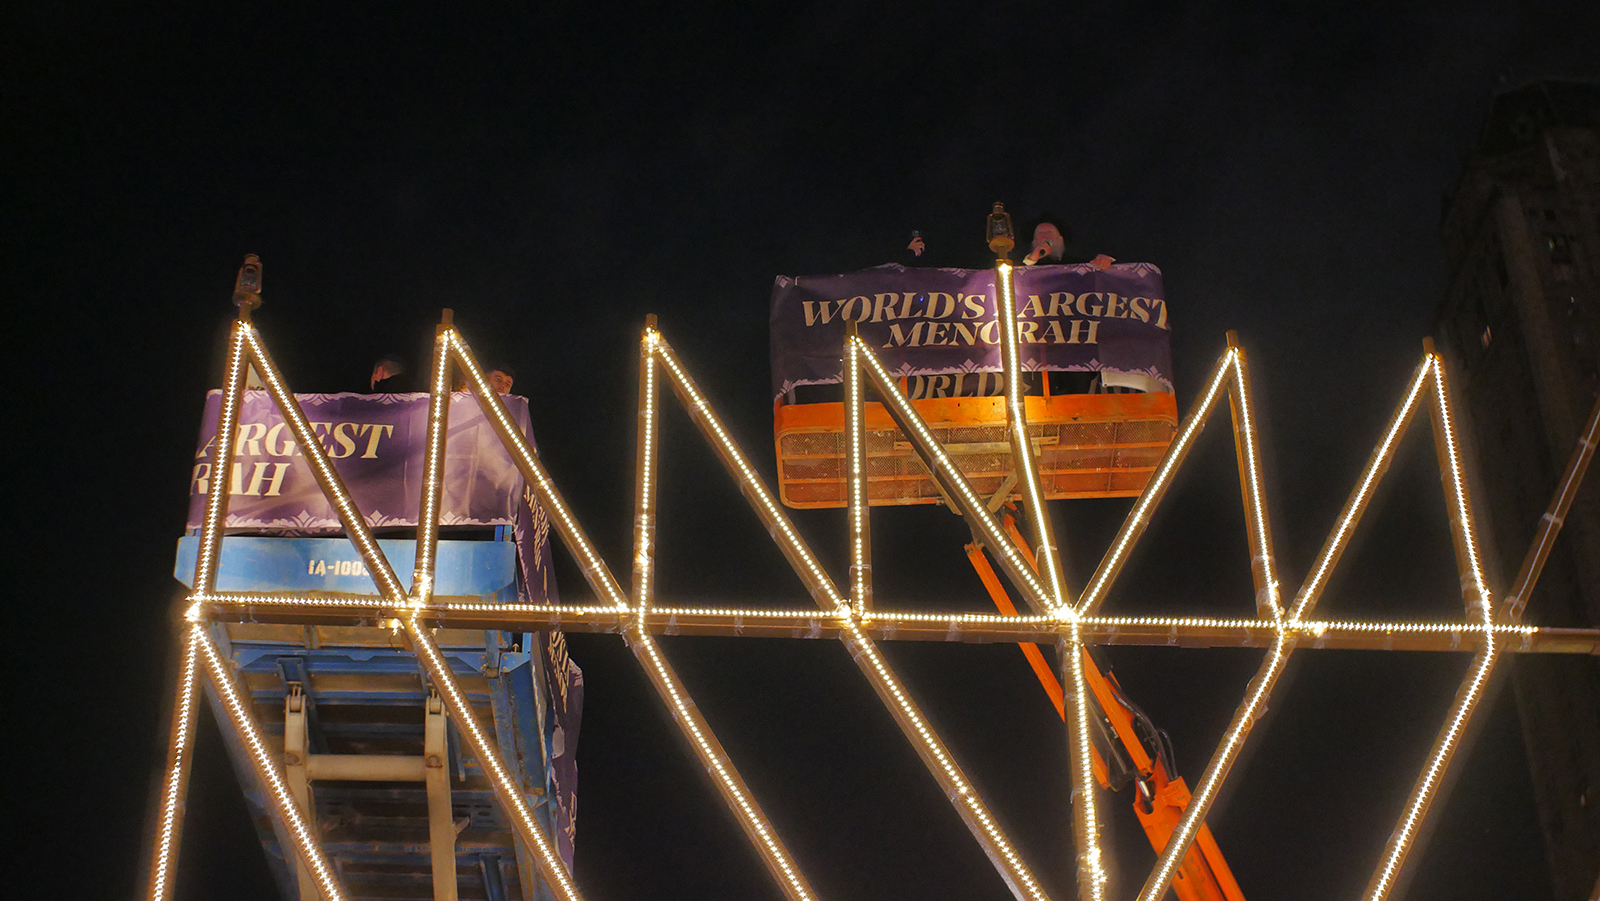 A 36-foot menorah - the world's largest - is lit in New York City on Dec. 18, 2022, to mark the start of Hanukkah. Photo by Yossi Soibelman/Lubavitch Youth Organization